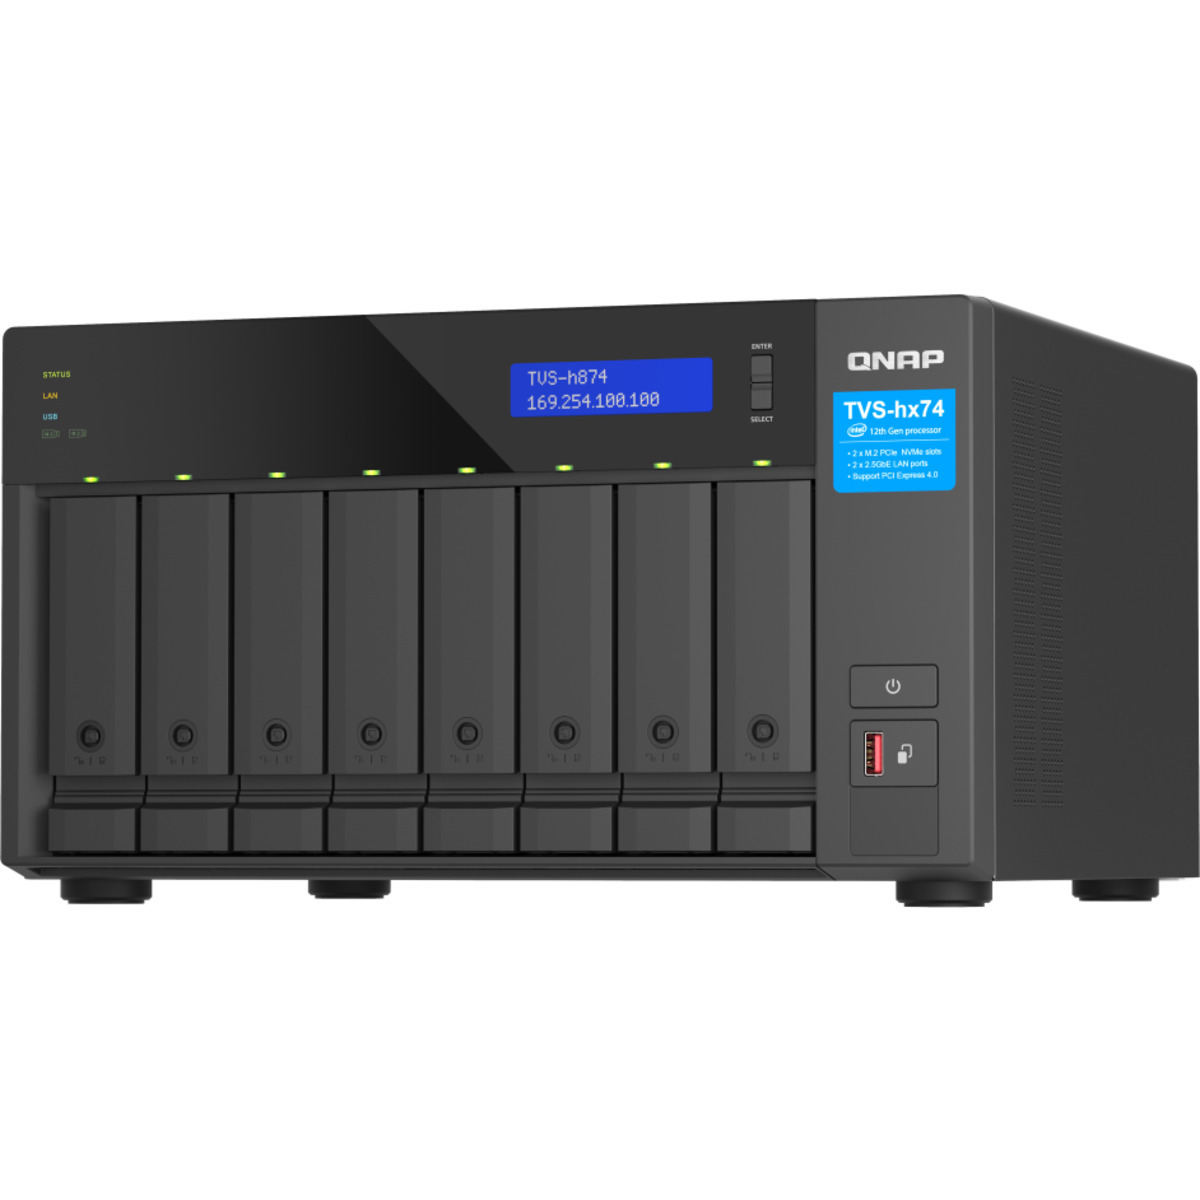 buy $2913 QNAP TVS-h874 Core i5 32tb Desktop NAS - Network Attached Storage Device 8x4000gb Toshiba MN Series MN08ADA400E 3.5 7200rpm SATA 6Gb/s HDD NAS Class Drives Installed - Burn-In Tested - ON SALE - nas headquarters buy network attached storage server device das new raid-5 free shipping simply usa TVS-h874 Core i5